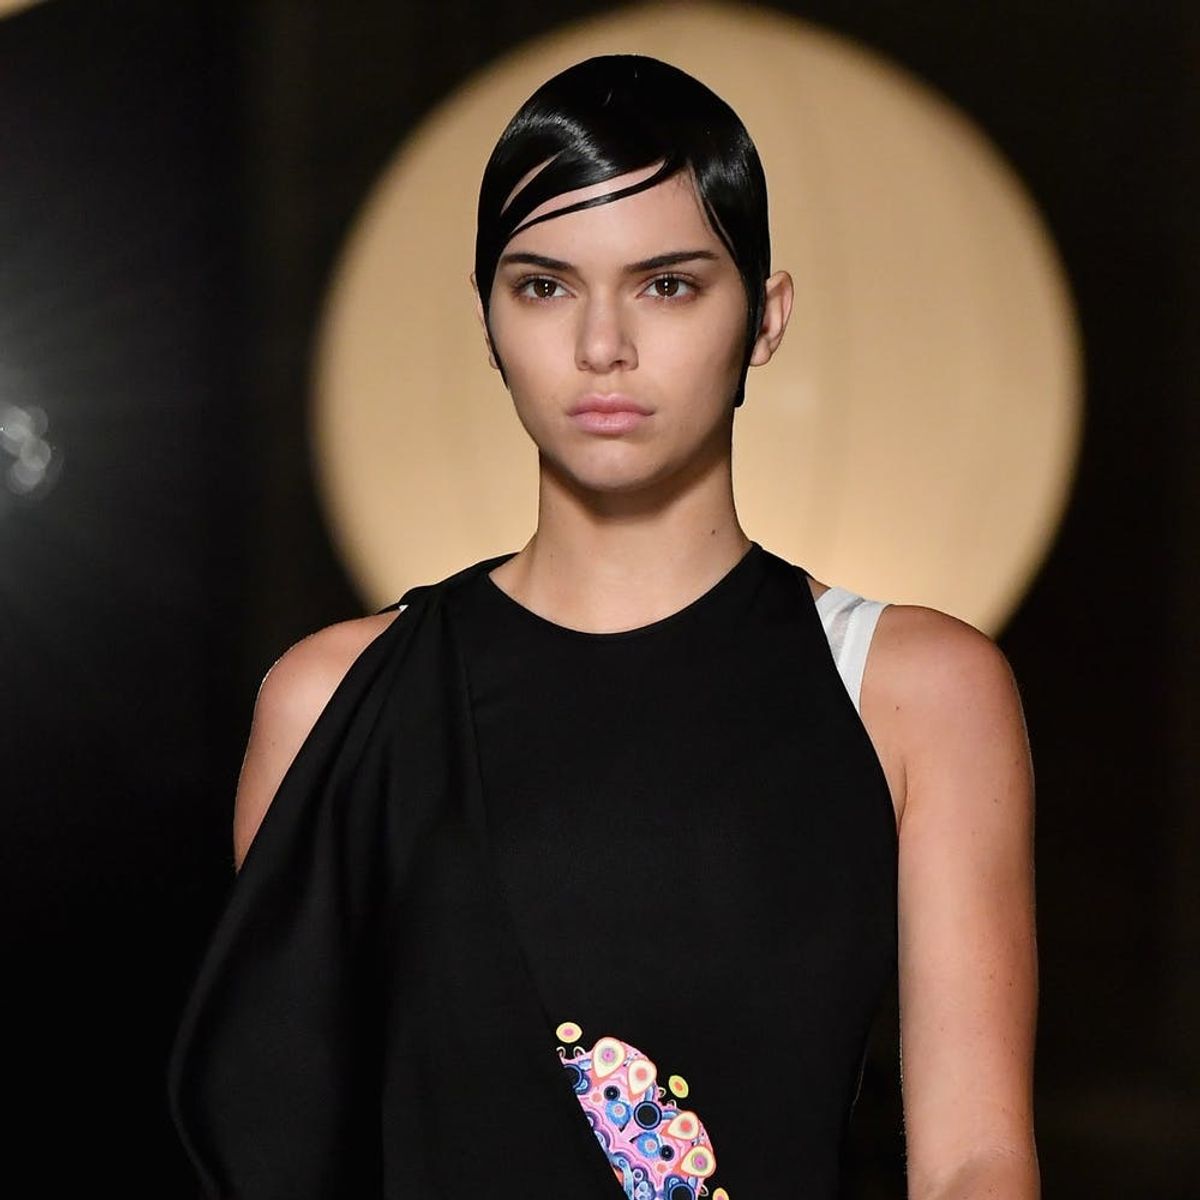 Kendall Jenner Has Some Words for Her Ballerina Haters